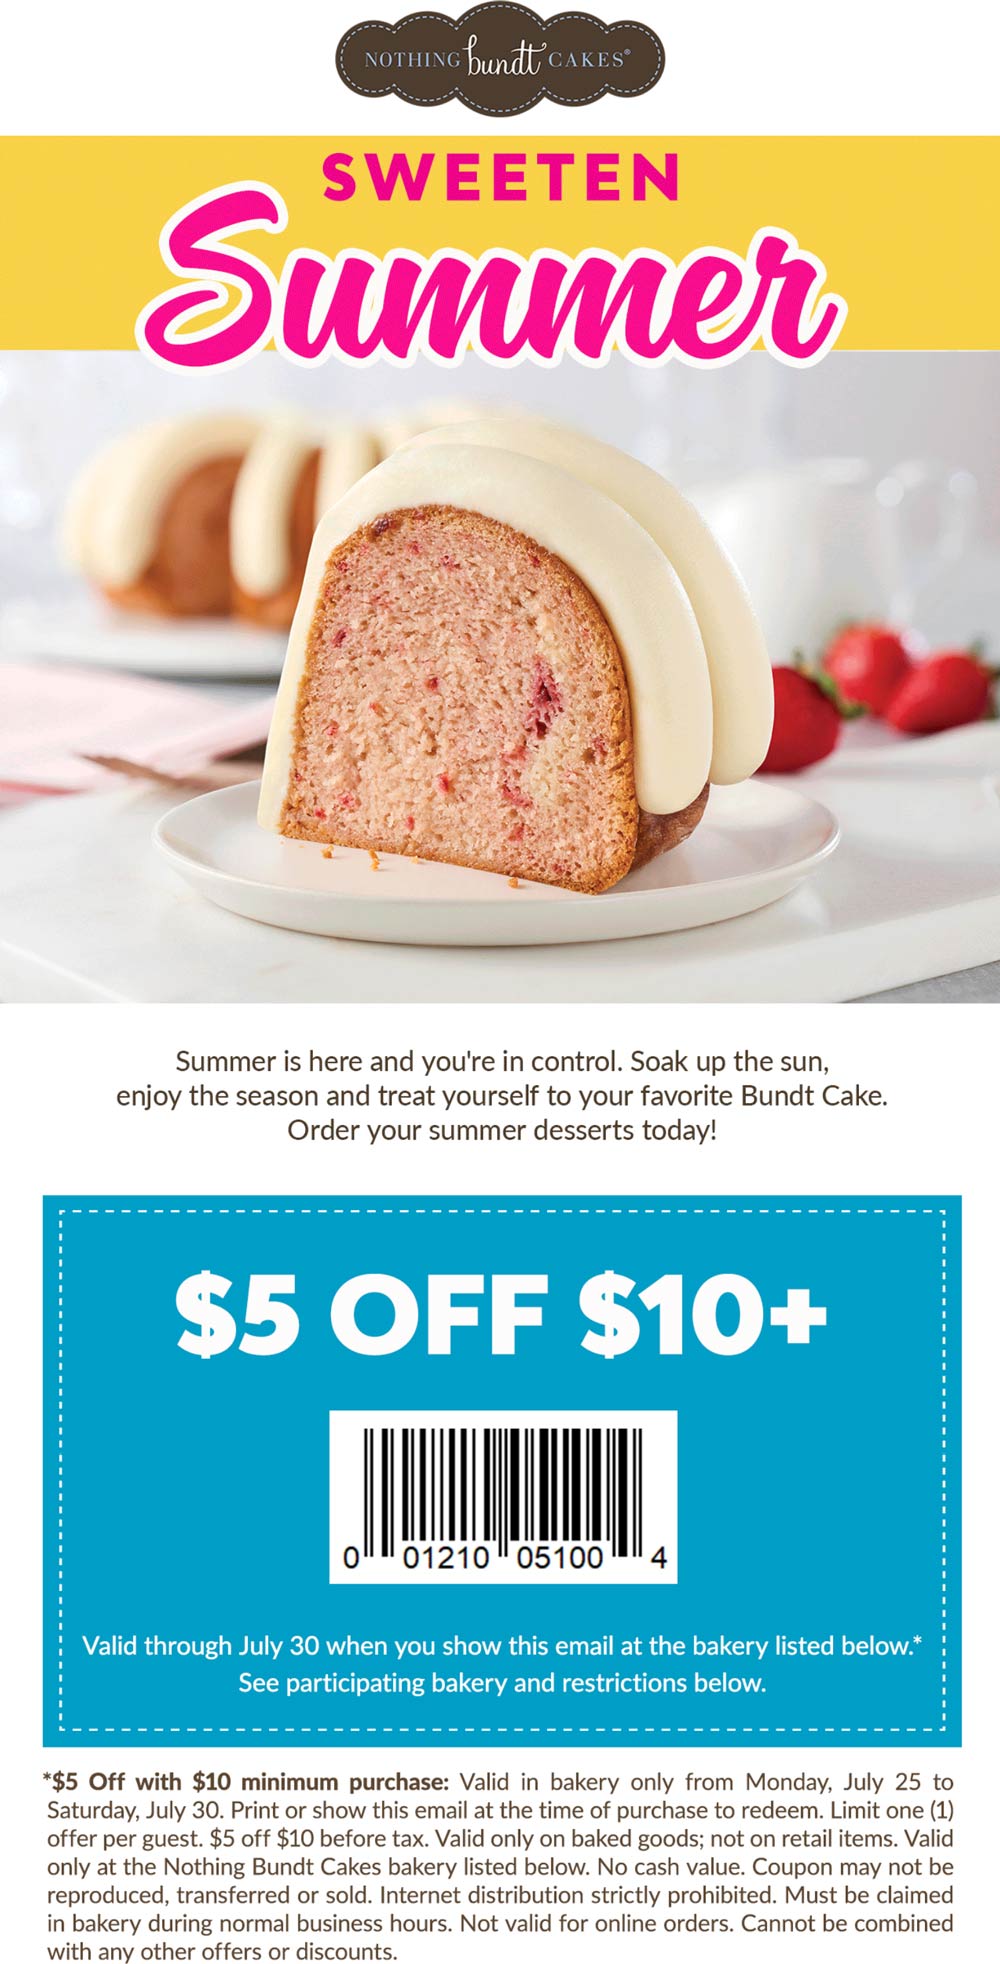 Nothing Bundt Cakes coupons & promo code for [December 2022]